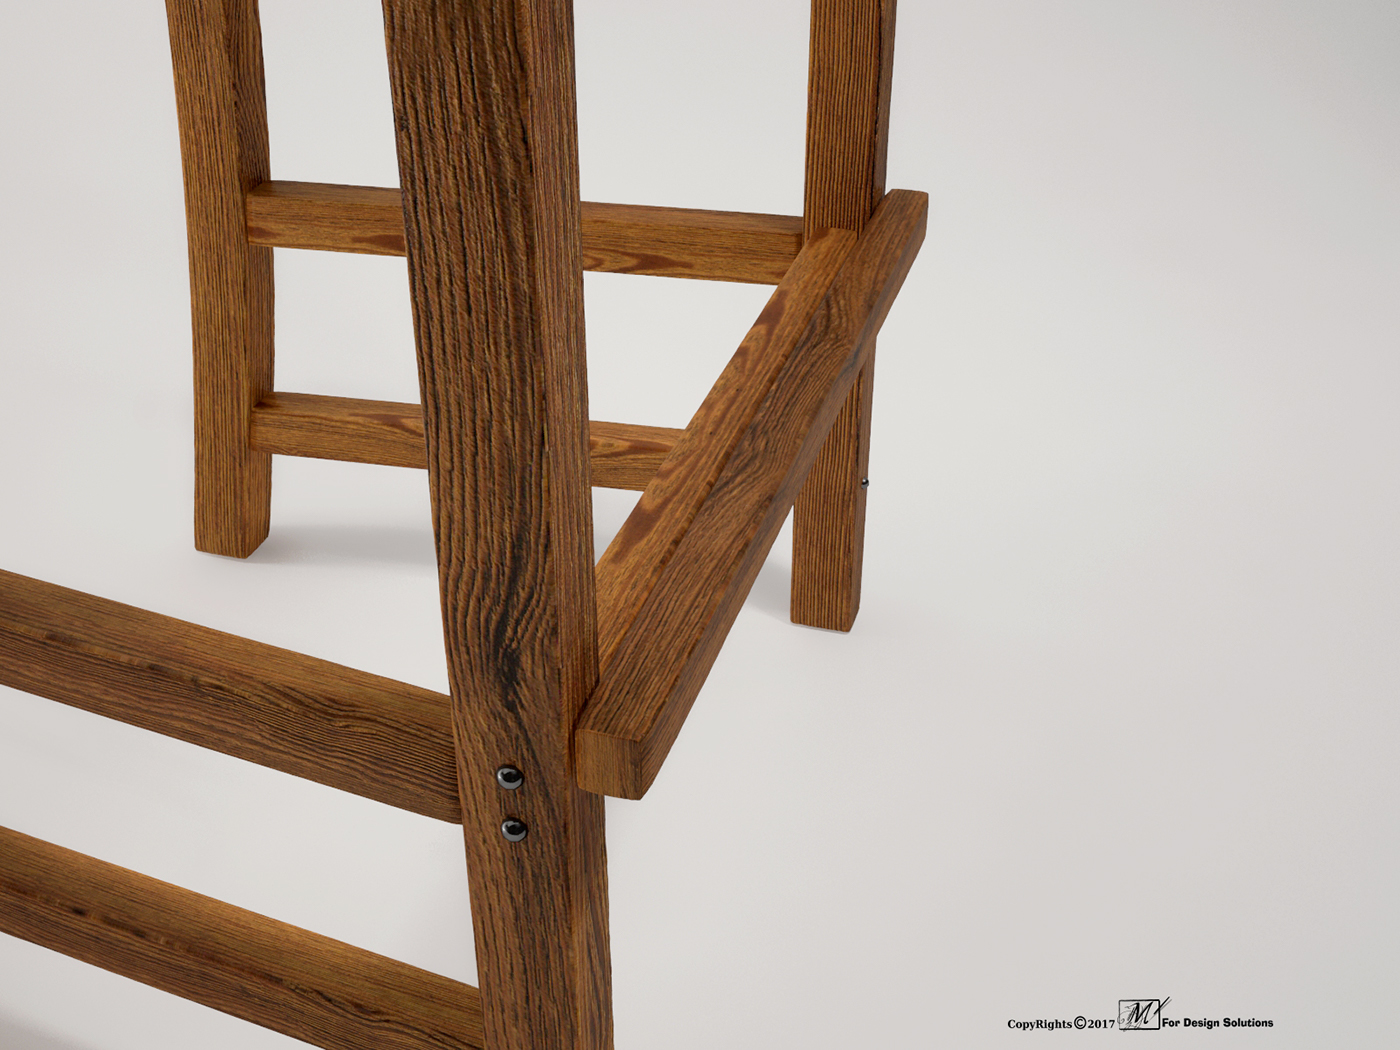 3ds max modeling texturing rendering chair